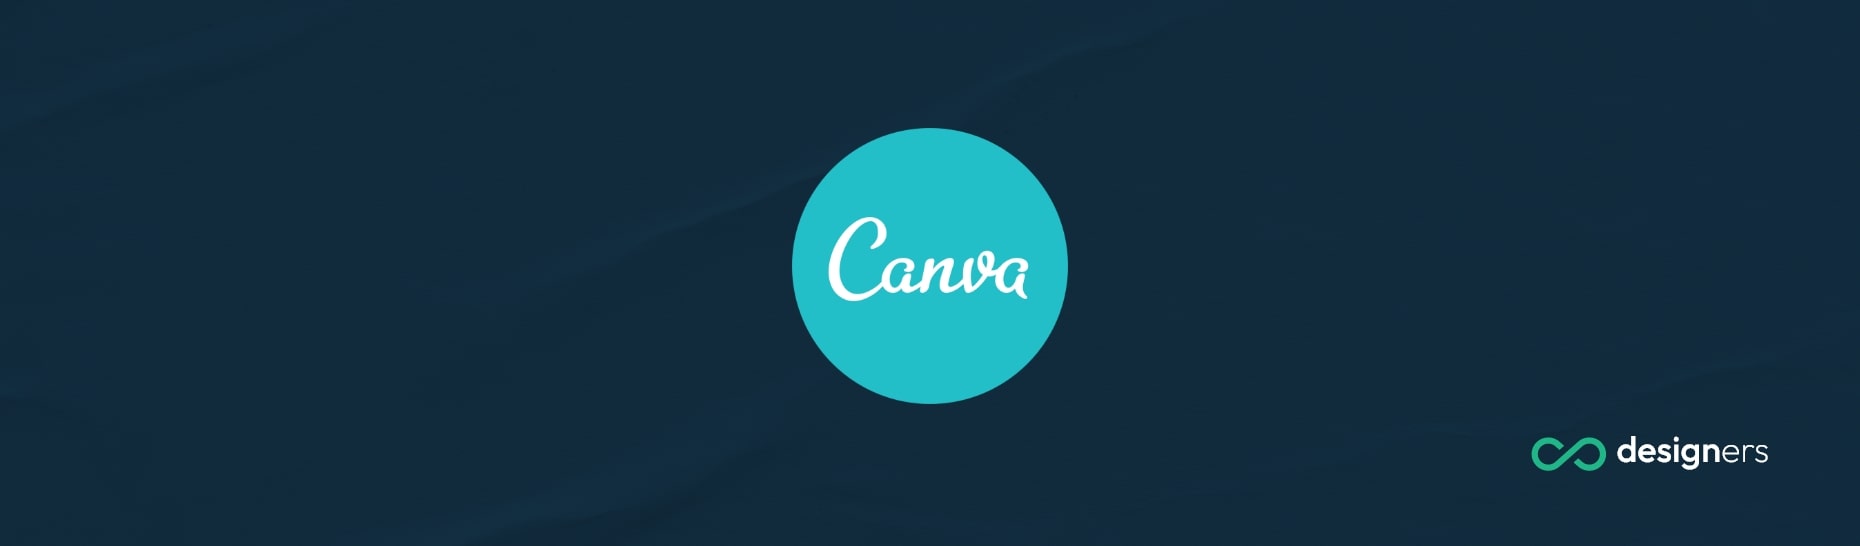 What Does Canva Company Do?